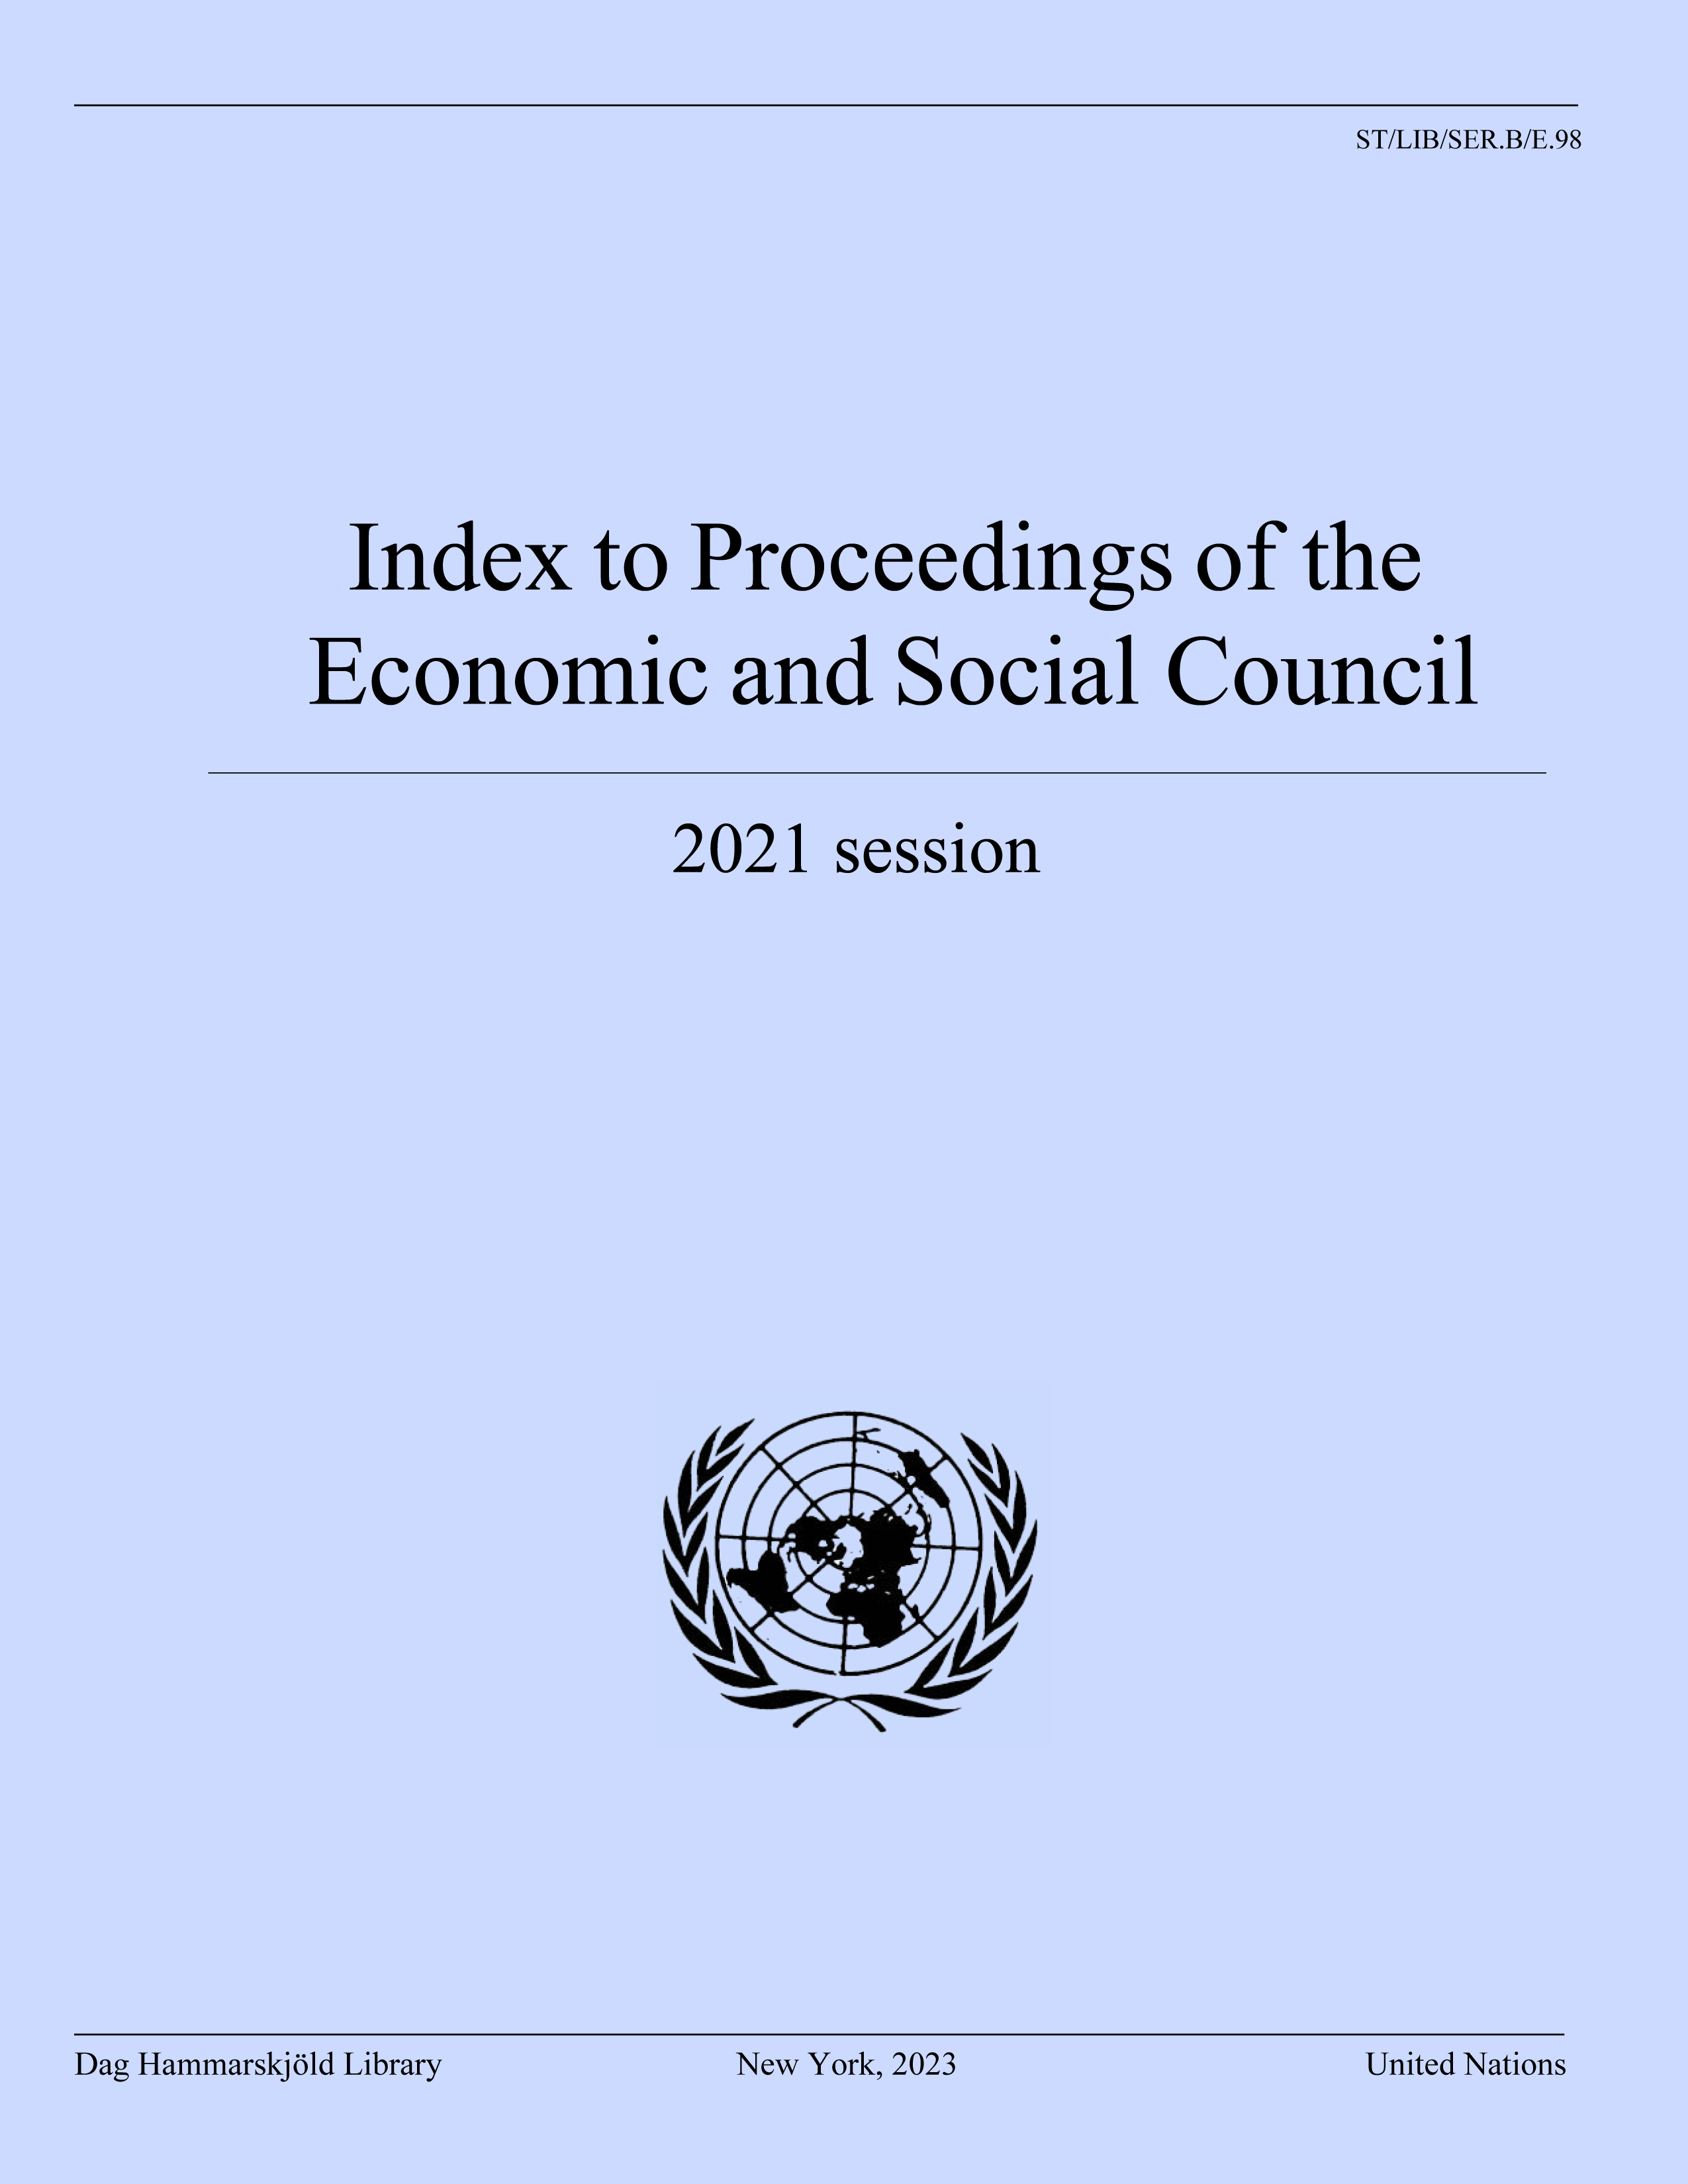 image of Index to Proceedings of the Economic and Social Council 2021